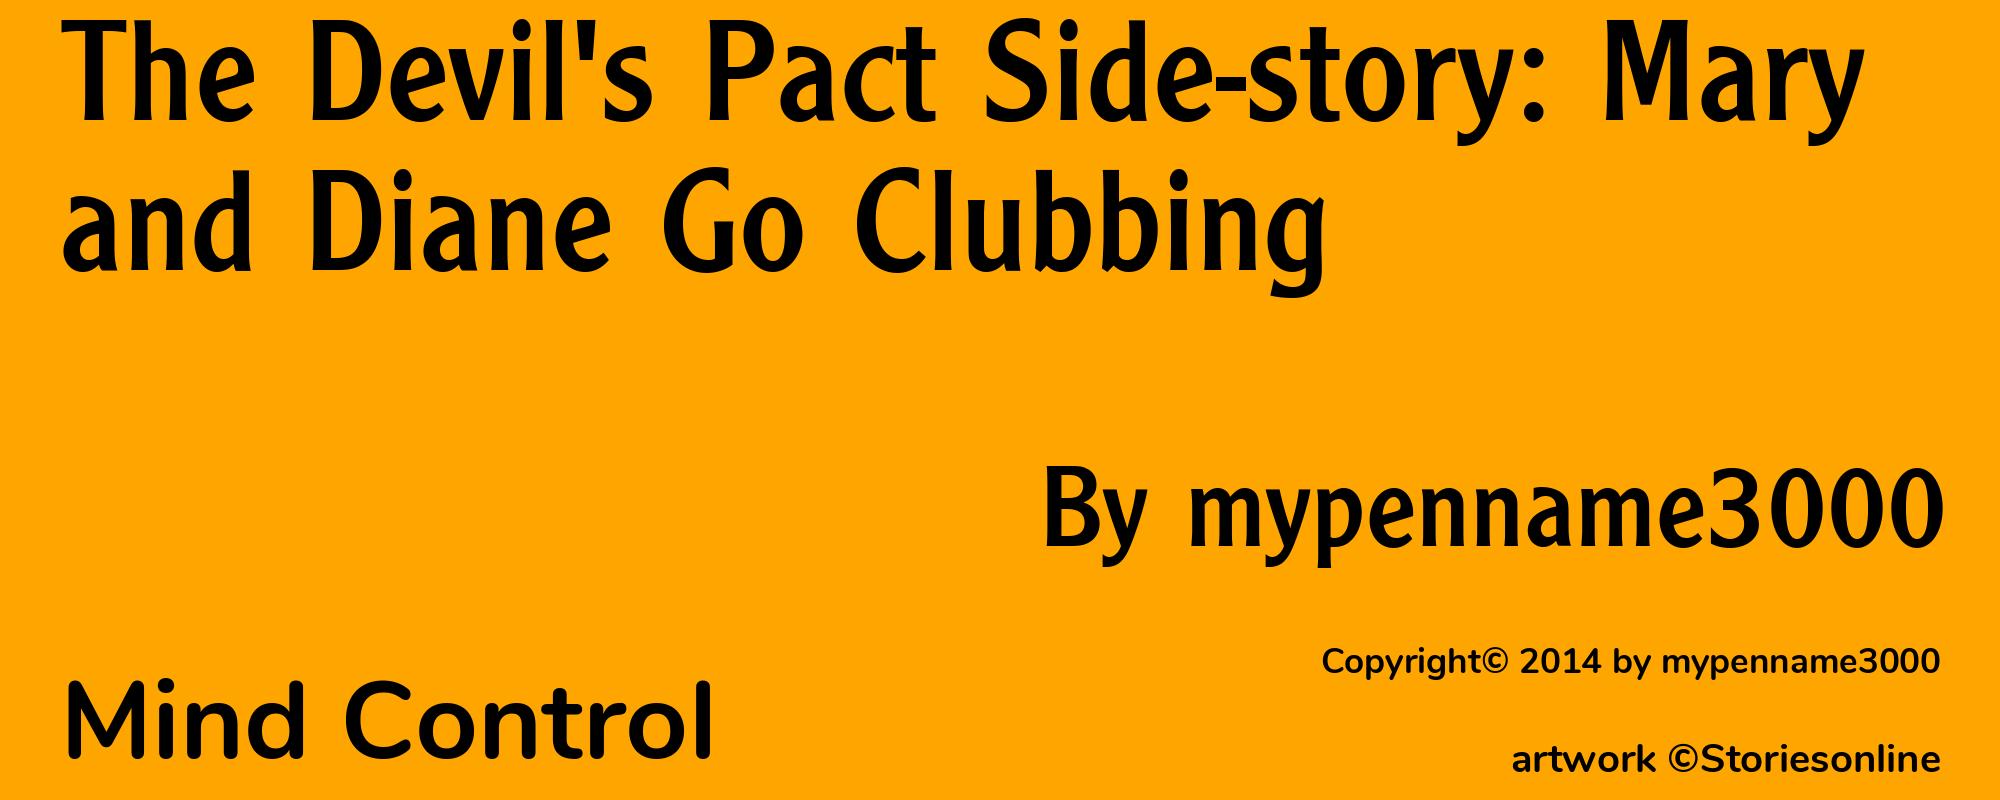 The Devil's Pact Side-story: Mary and Diane Go Clubbing - Cover